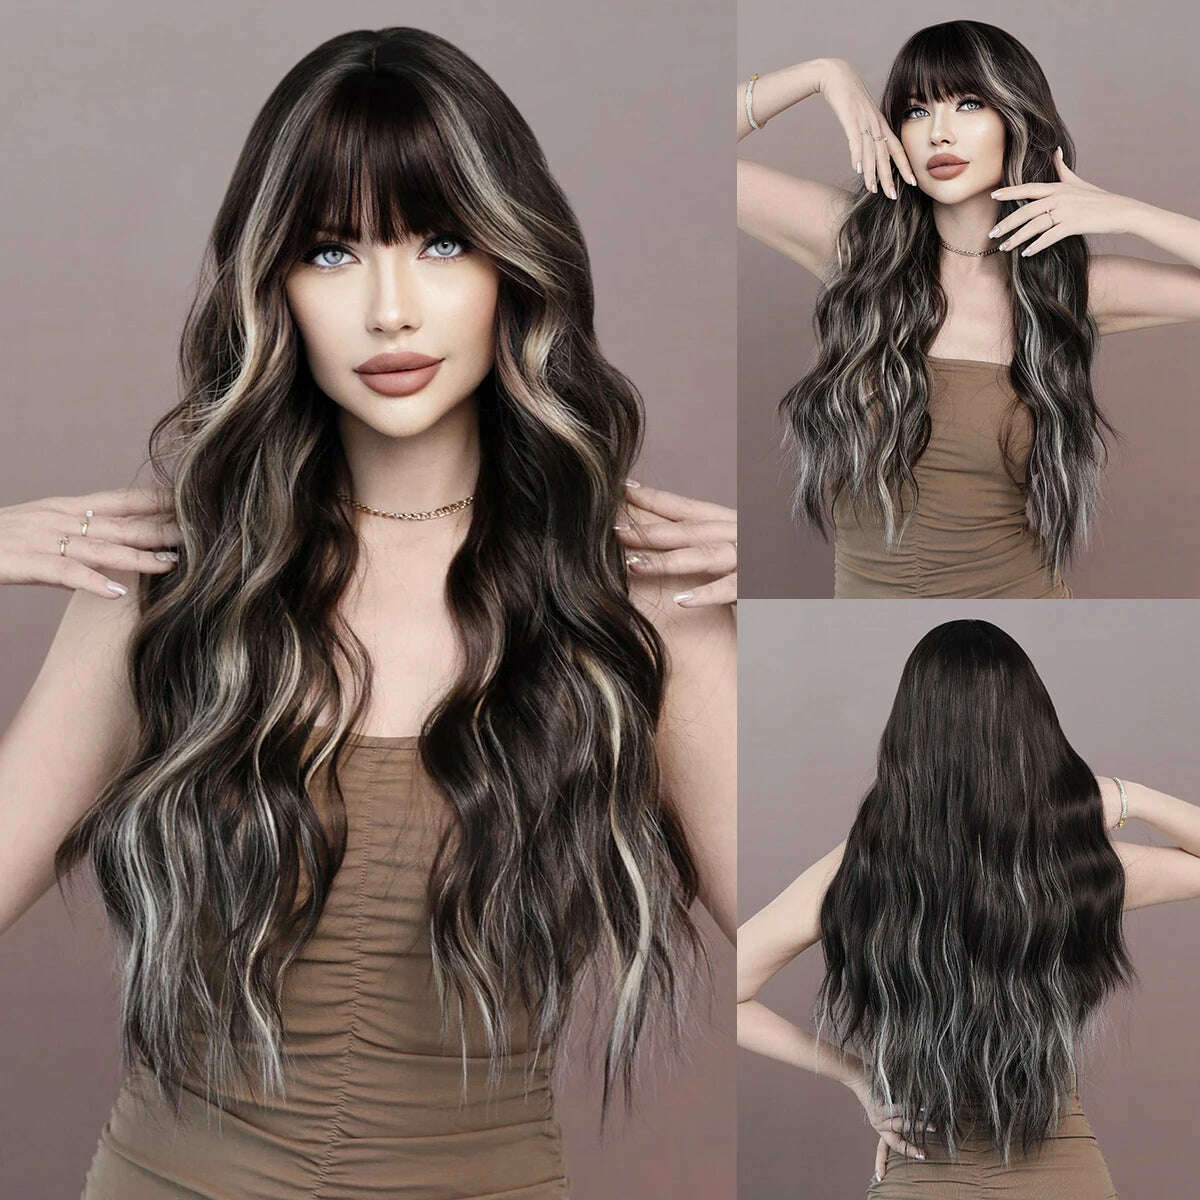 KIMLUD, NAMM Long Wave Wig With Silver Gray Gradient Women Popular Synthetic Wig for Daily Cosplay High Density Hair, MW9109-1, KIMLUD Womens Clothes